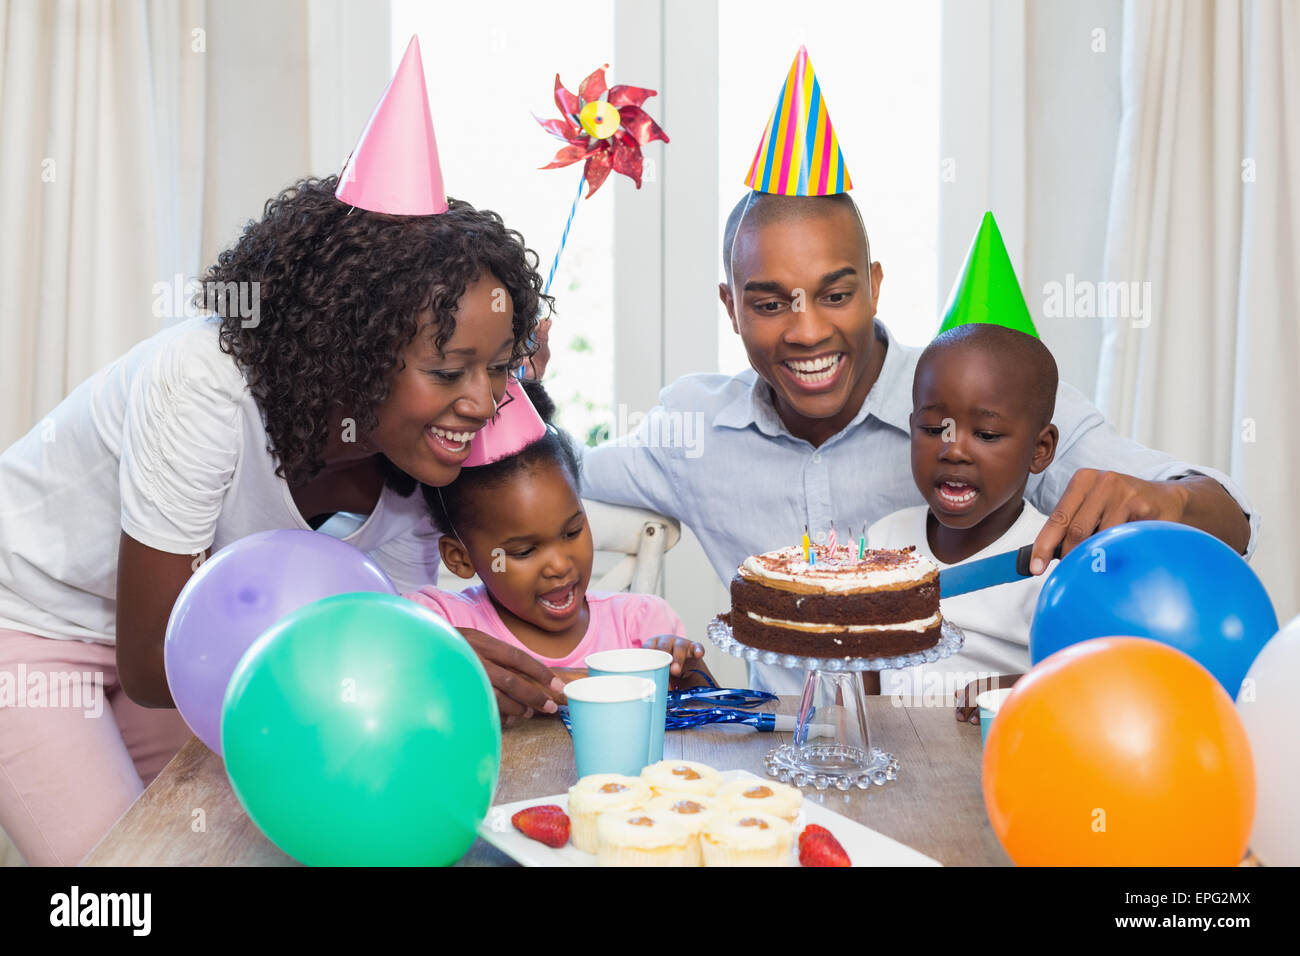 Happy family celebrating a birthday together at table Stock Photo